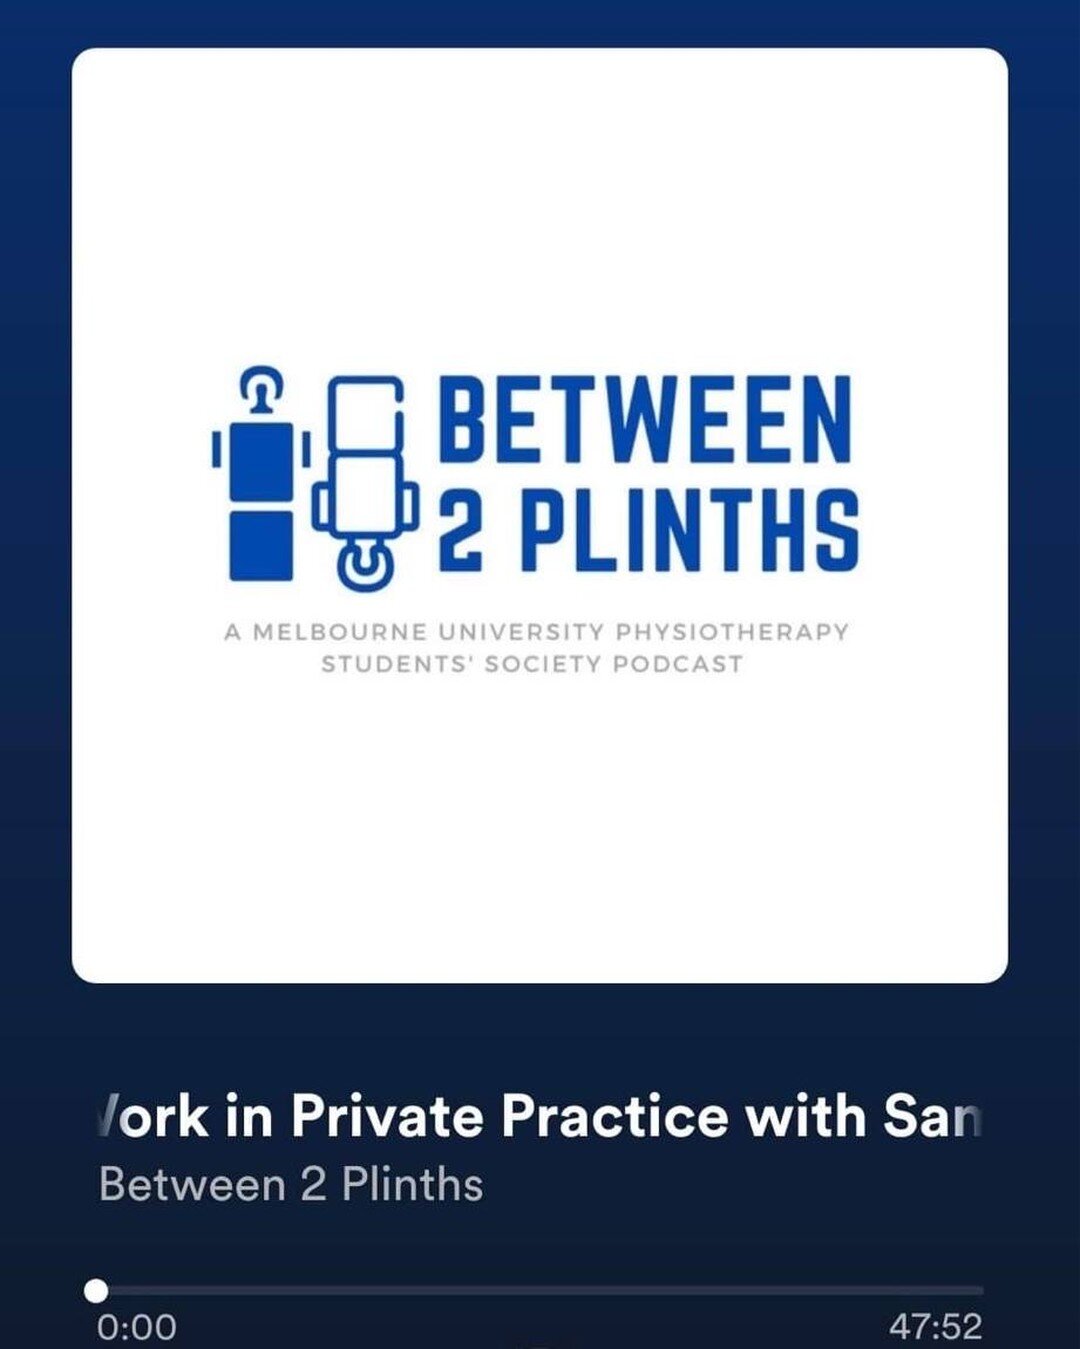 Sam appeared on the Between 2 Plinths podcast, check it out on the link below!

https://open.spotify.com/episode/1D7q58GskRMwGQiCKwgIeb?si=a6f547be51cc4bdb

#fyp #Physiotherapy  #exercise #physiostudent #osteo #myo #osteostudent #chiro #university #r